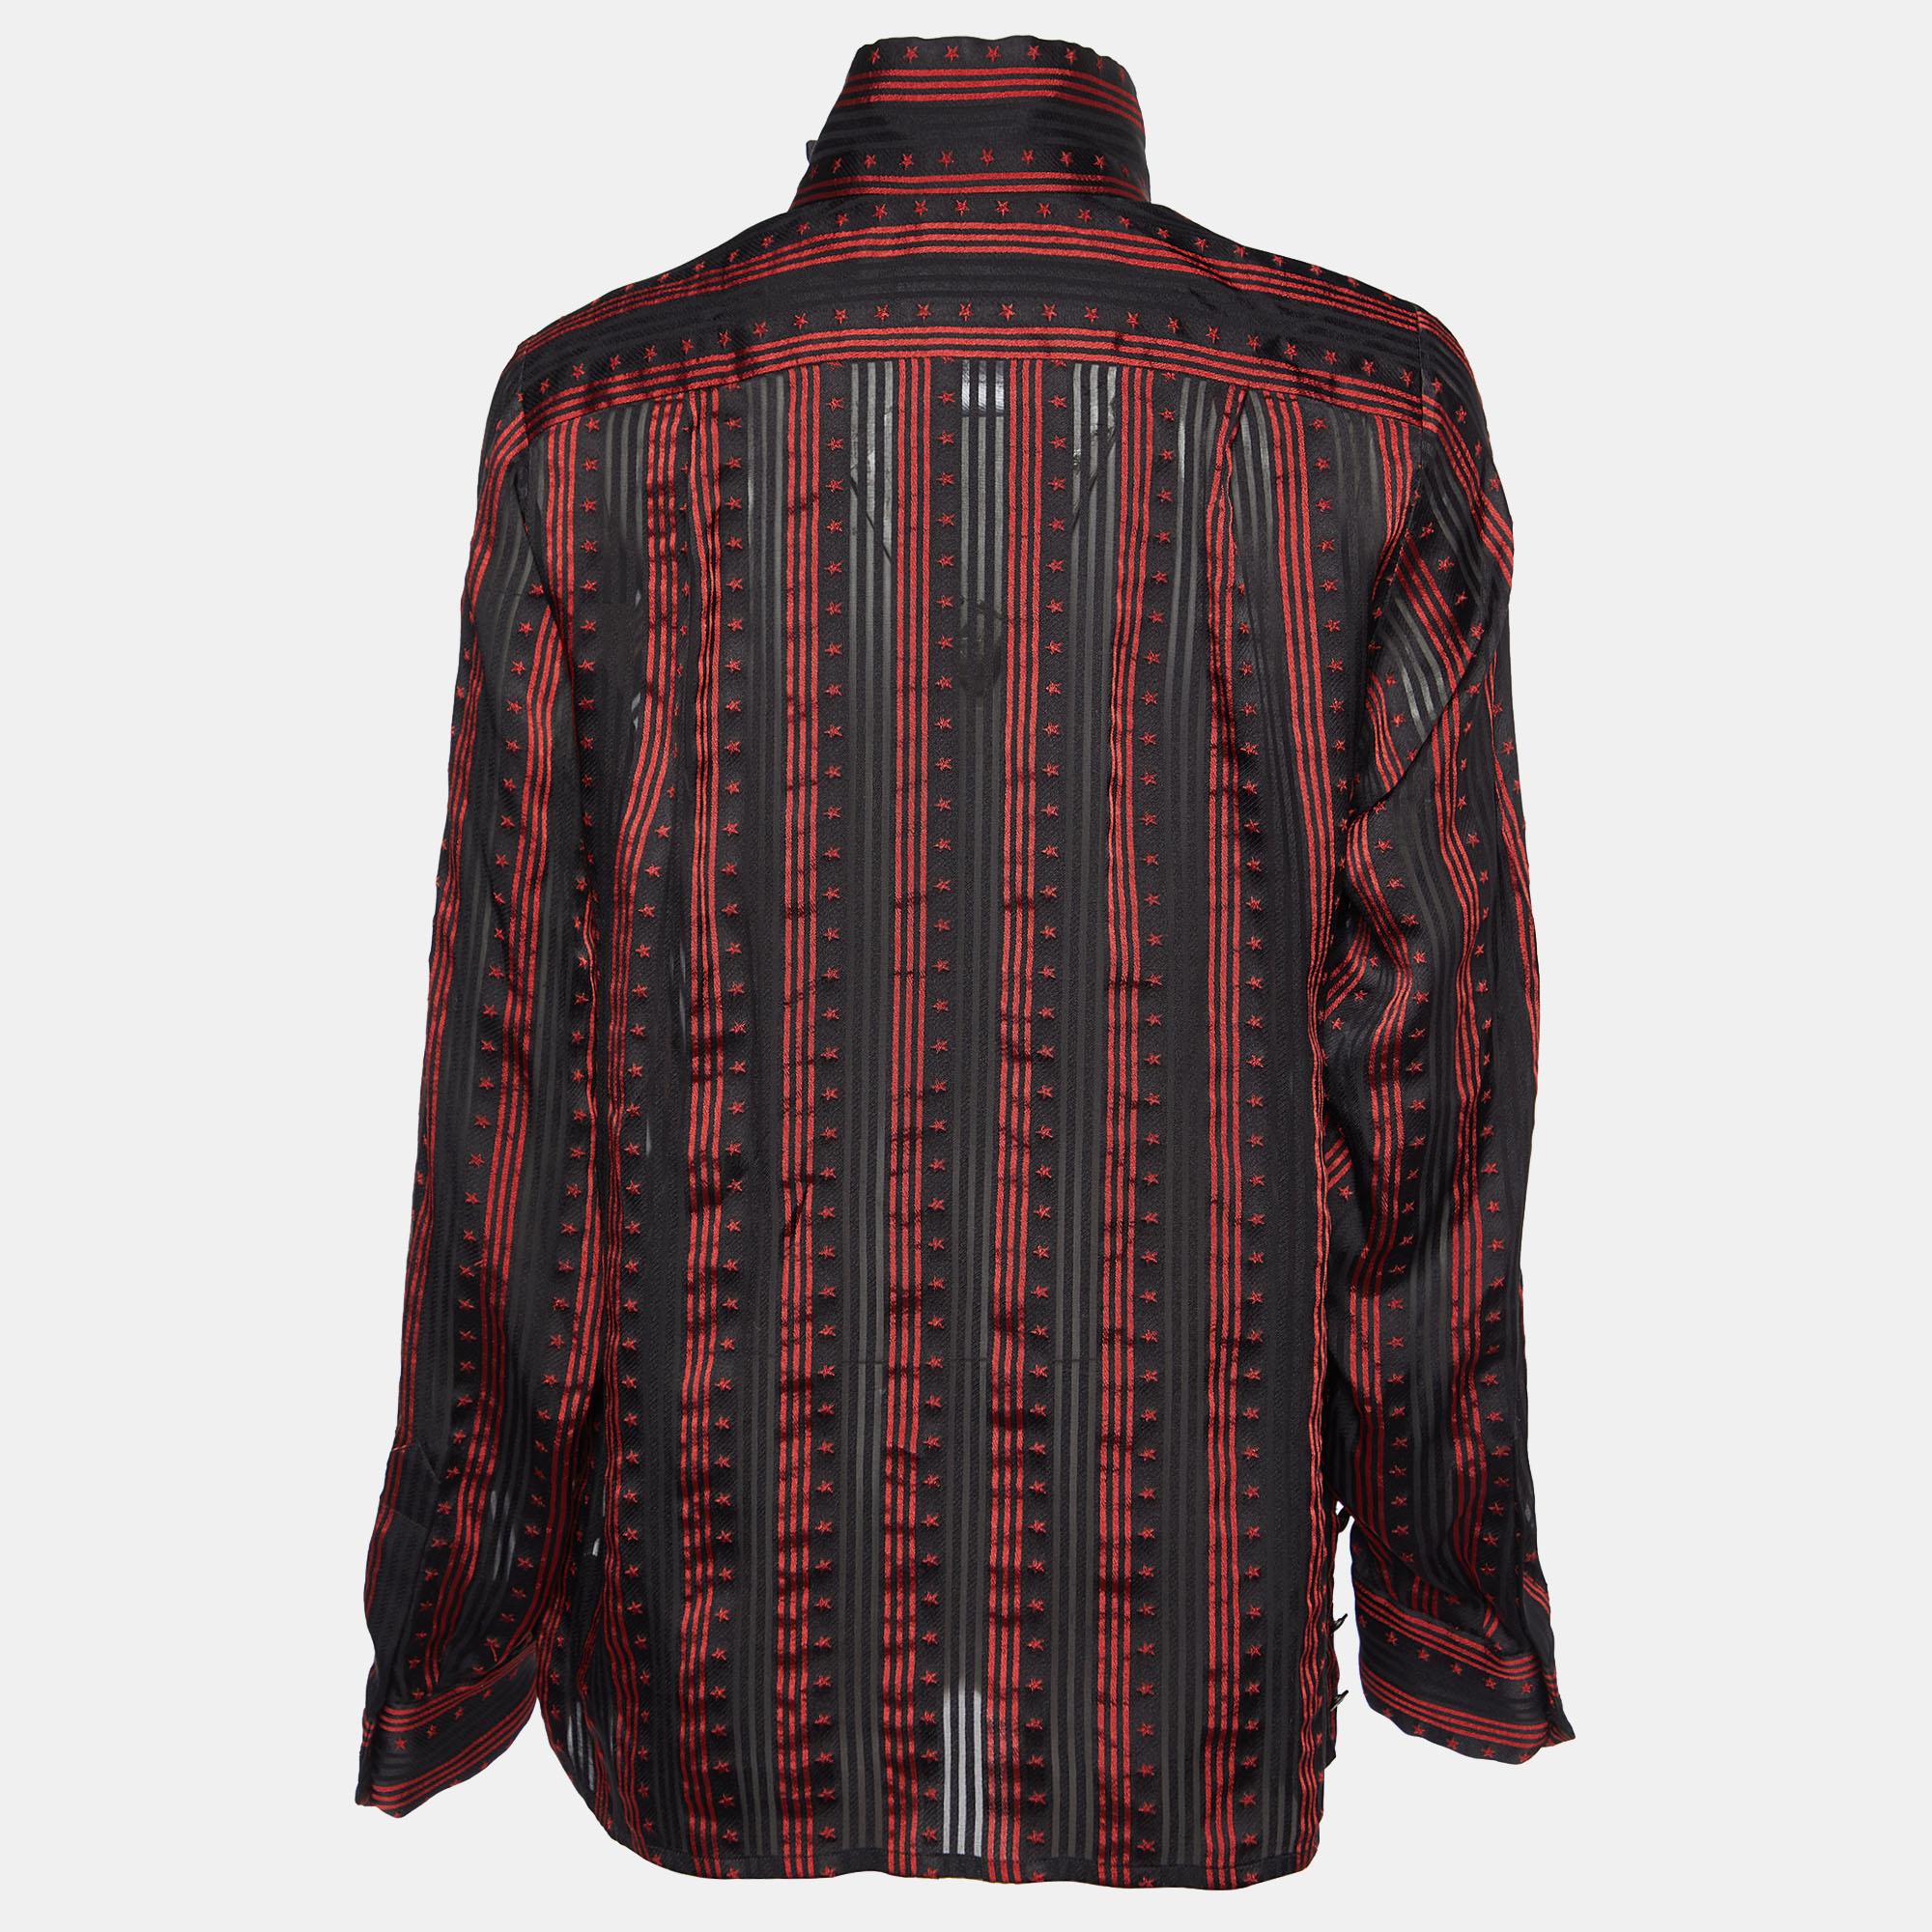 Chanel Black/Red Star Striped Silk Pleated Sheer Shirt L In Excellent Condition For Sale In Dubai, Al Qouz 2